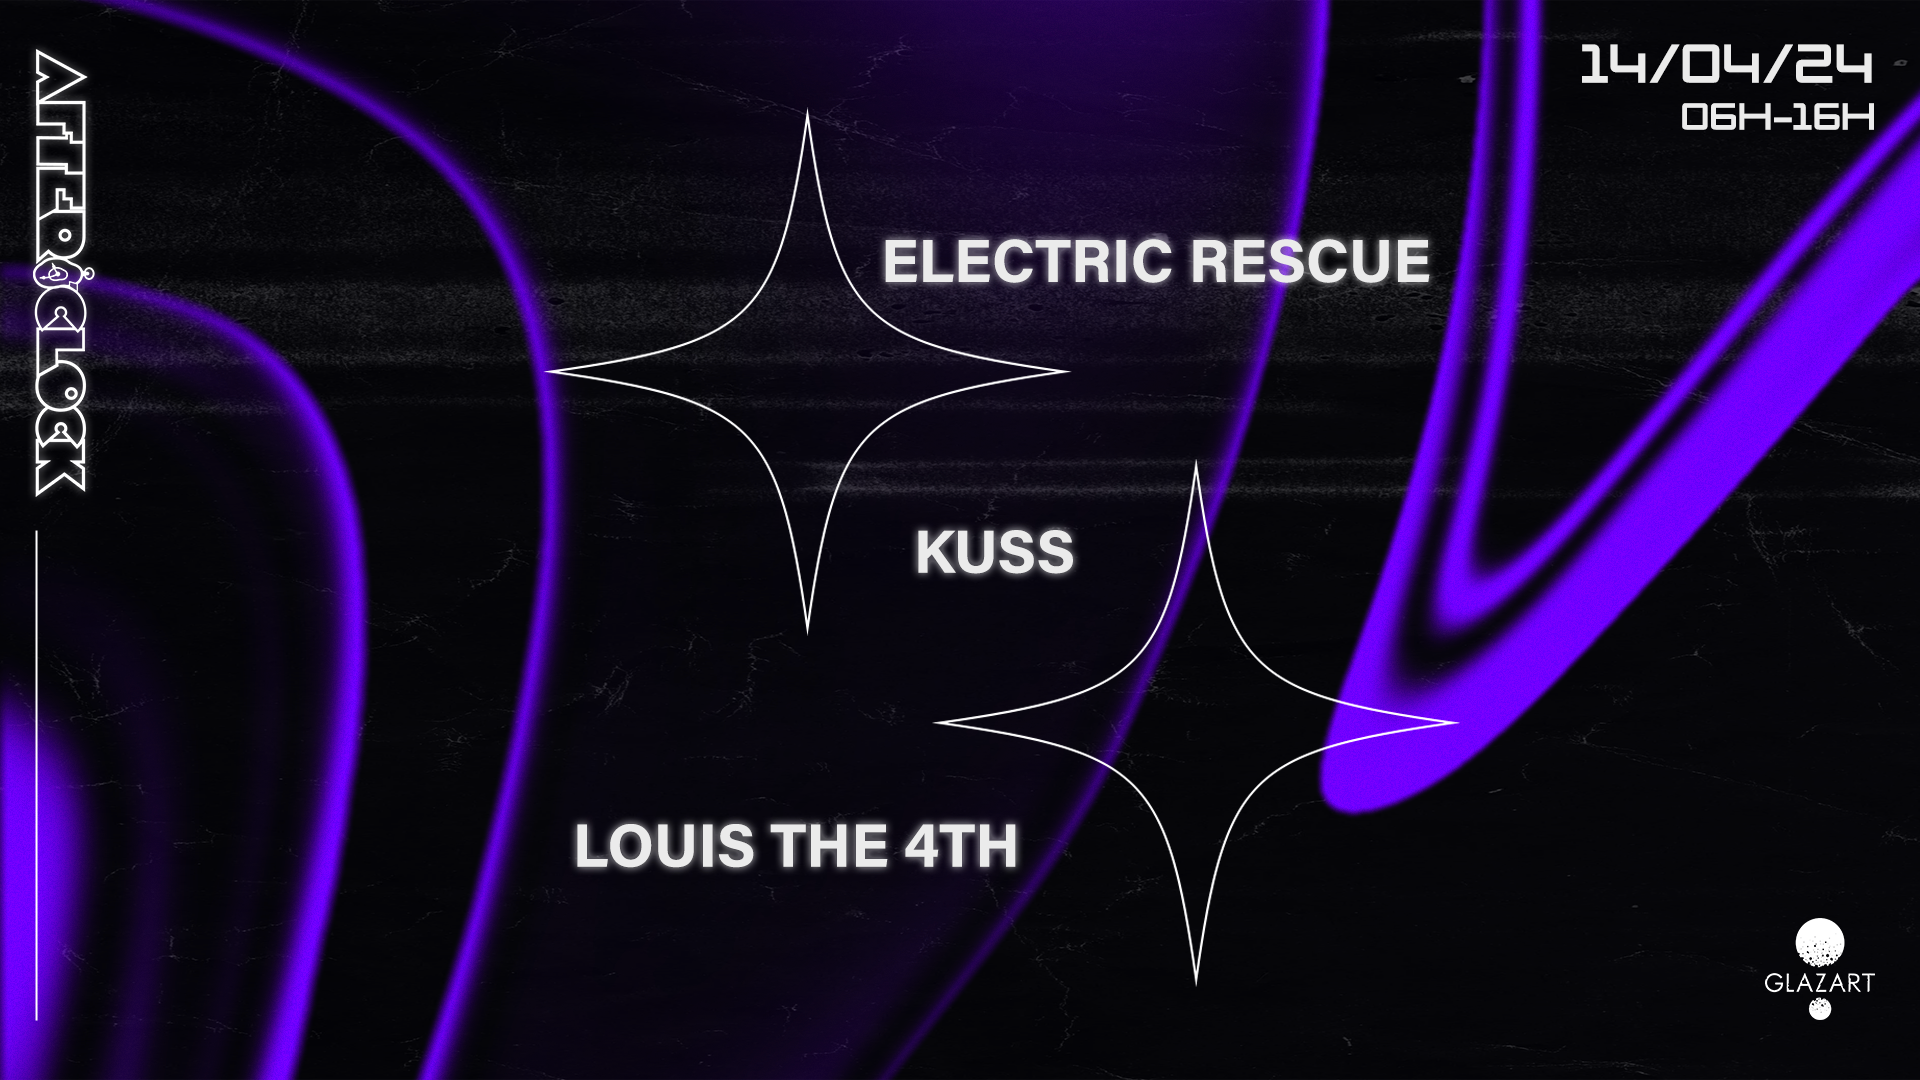 After O'Clock: Louis The 4th, KUSS & Electric Rescue - Página frontal